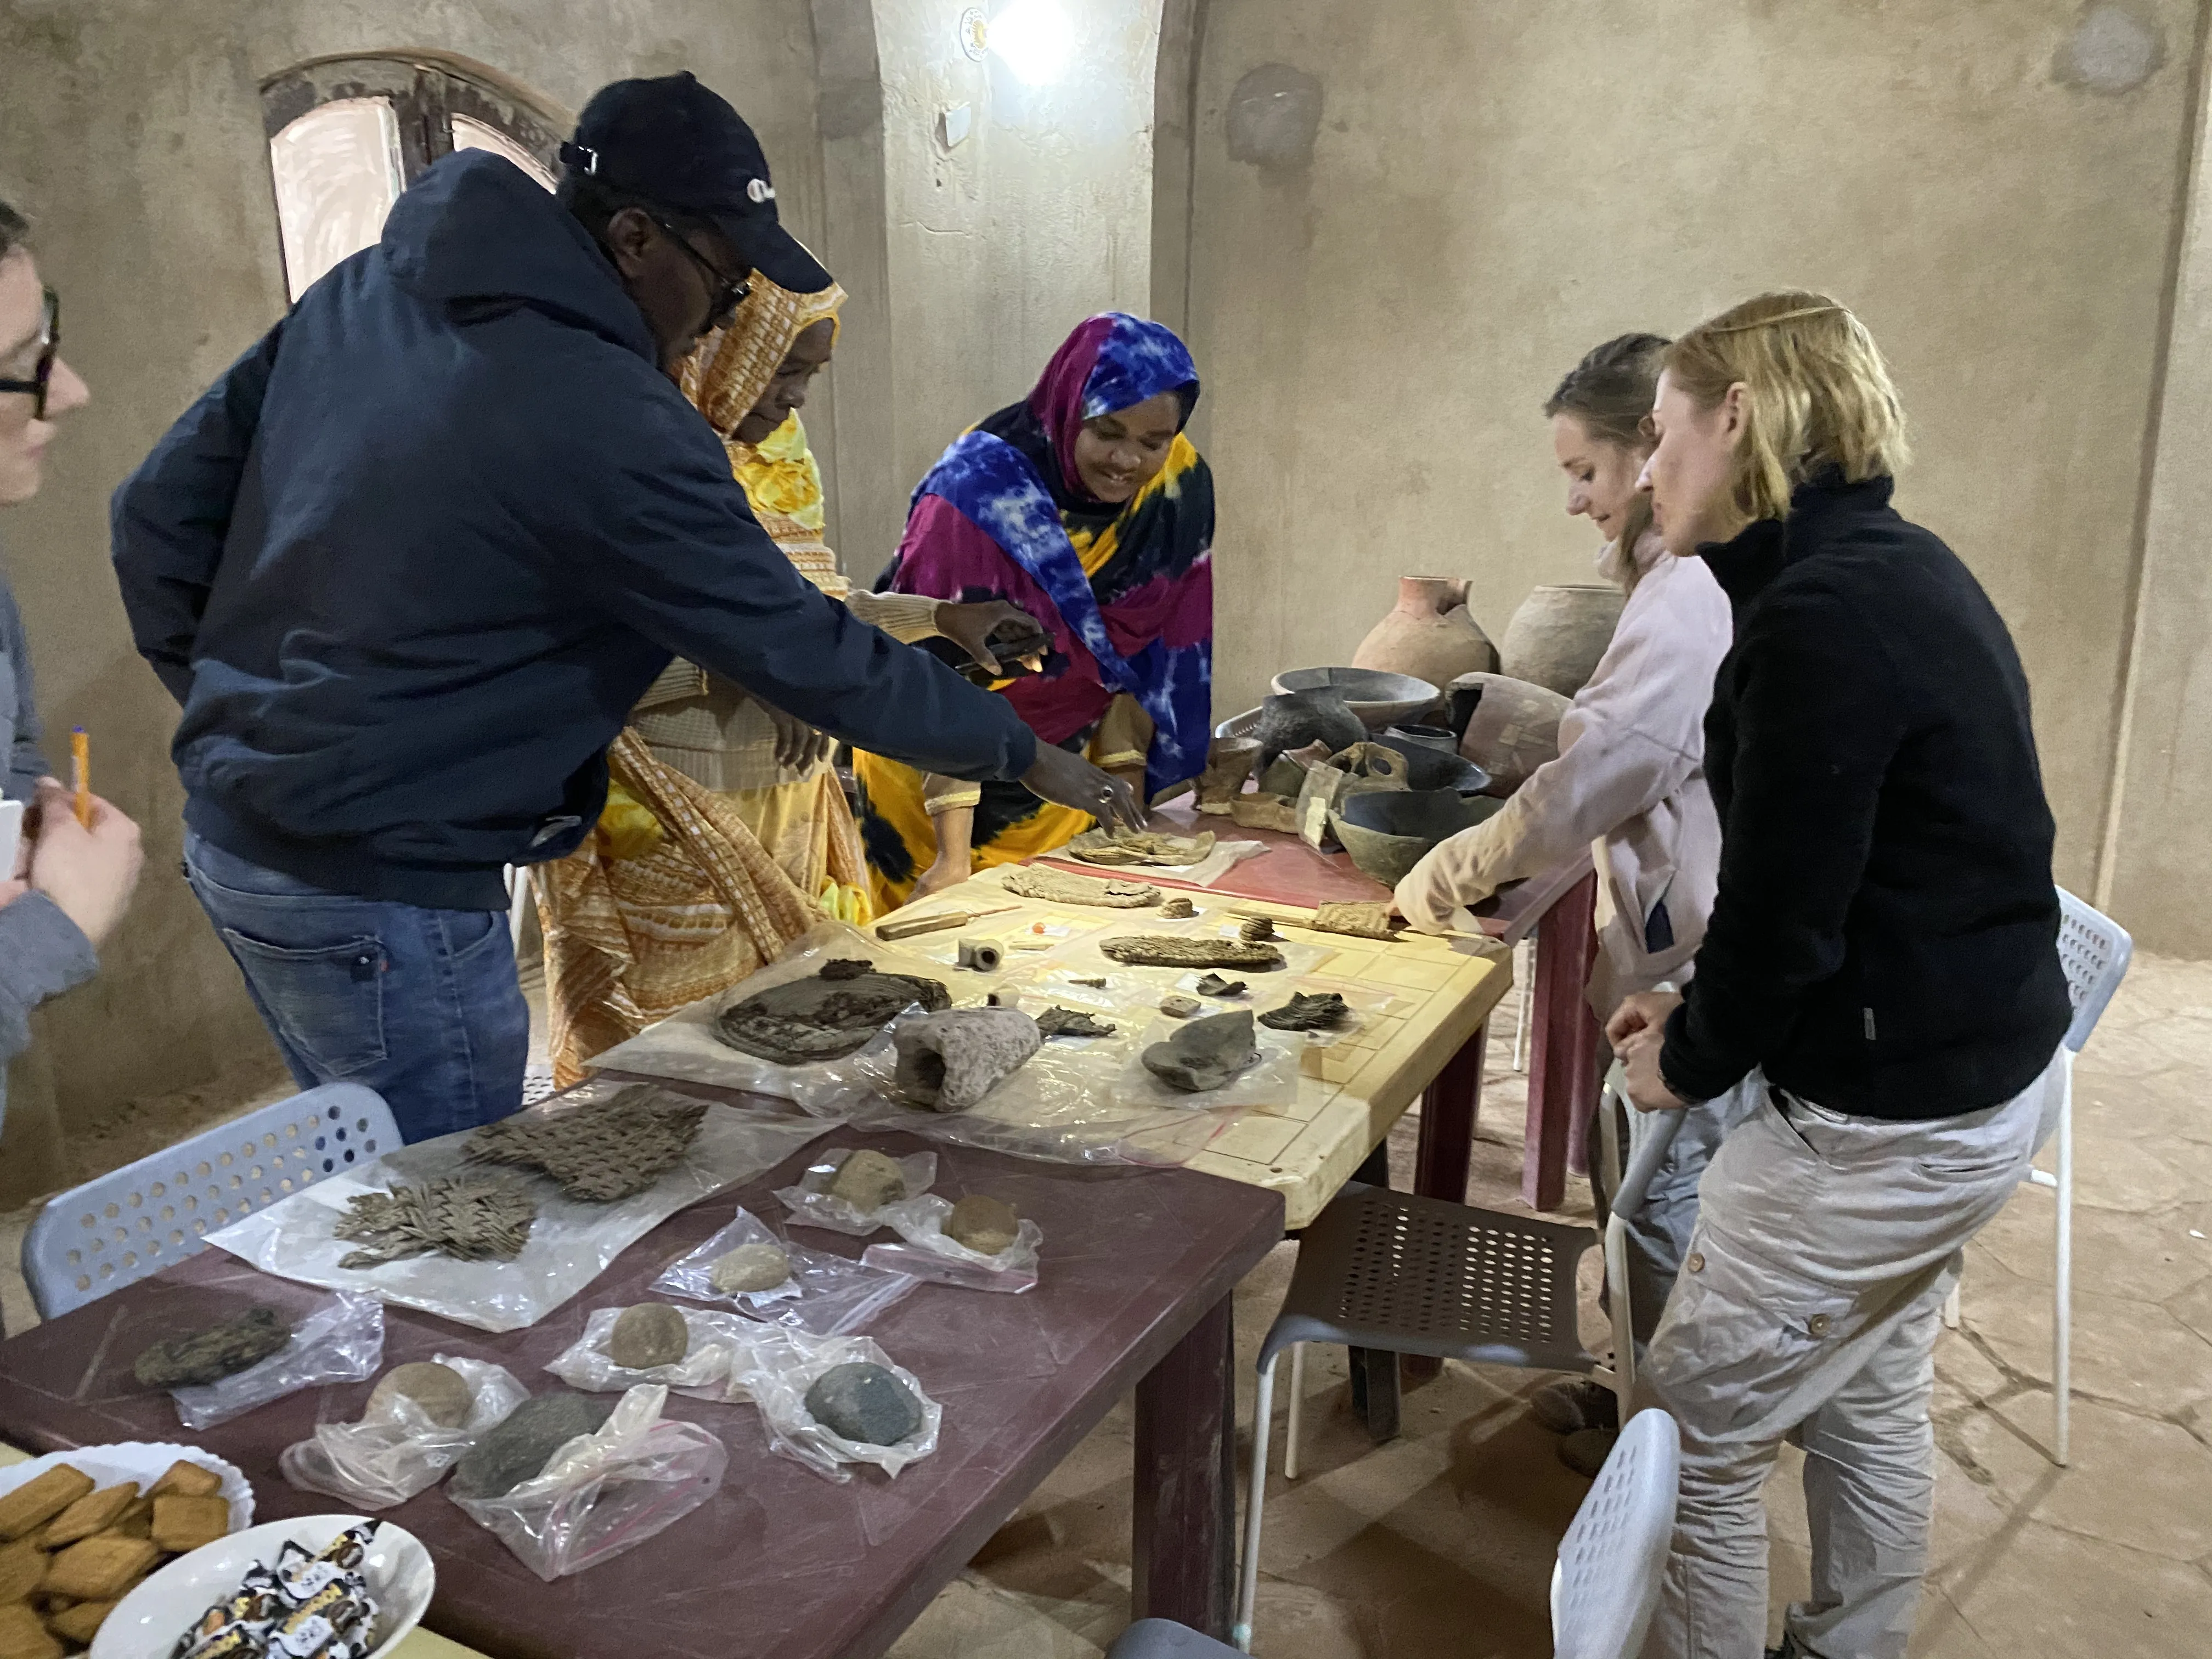 Polish archaeologists and local women try to identify excavated objects together. Credit: T. Fushiya